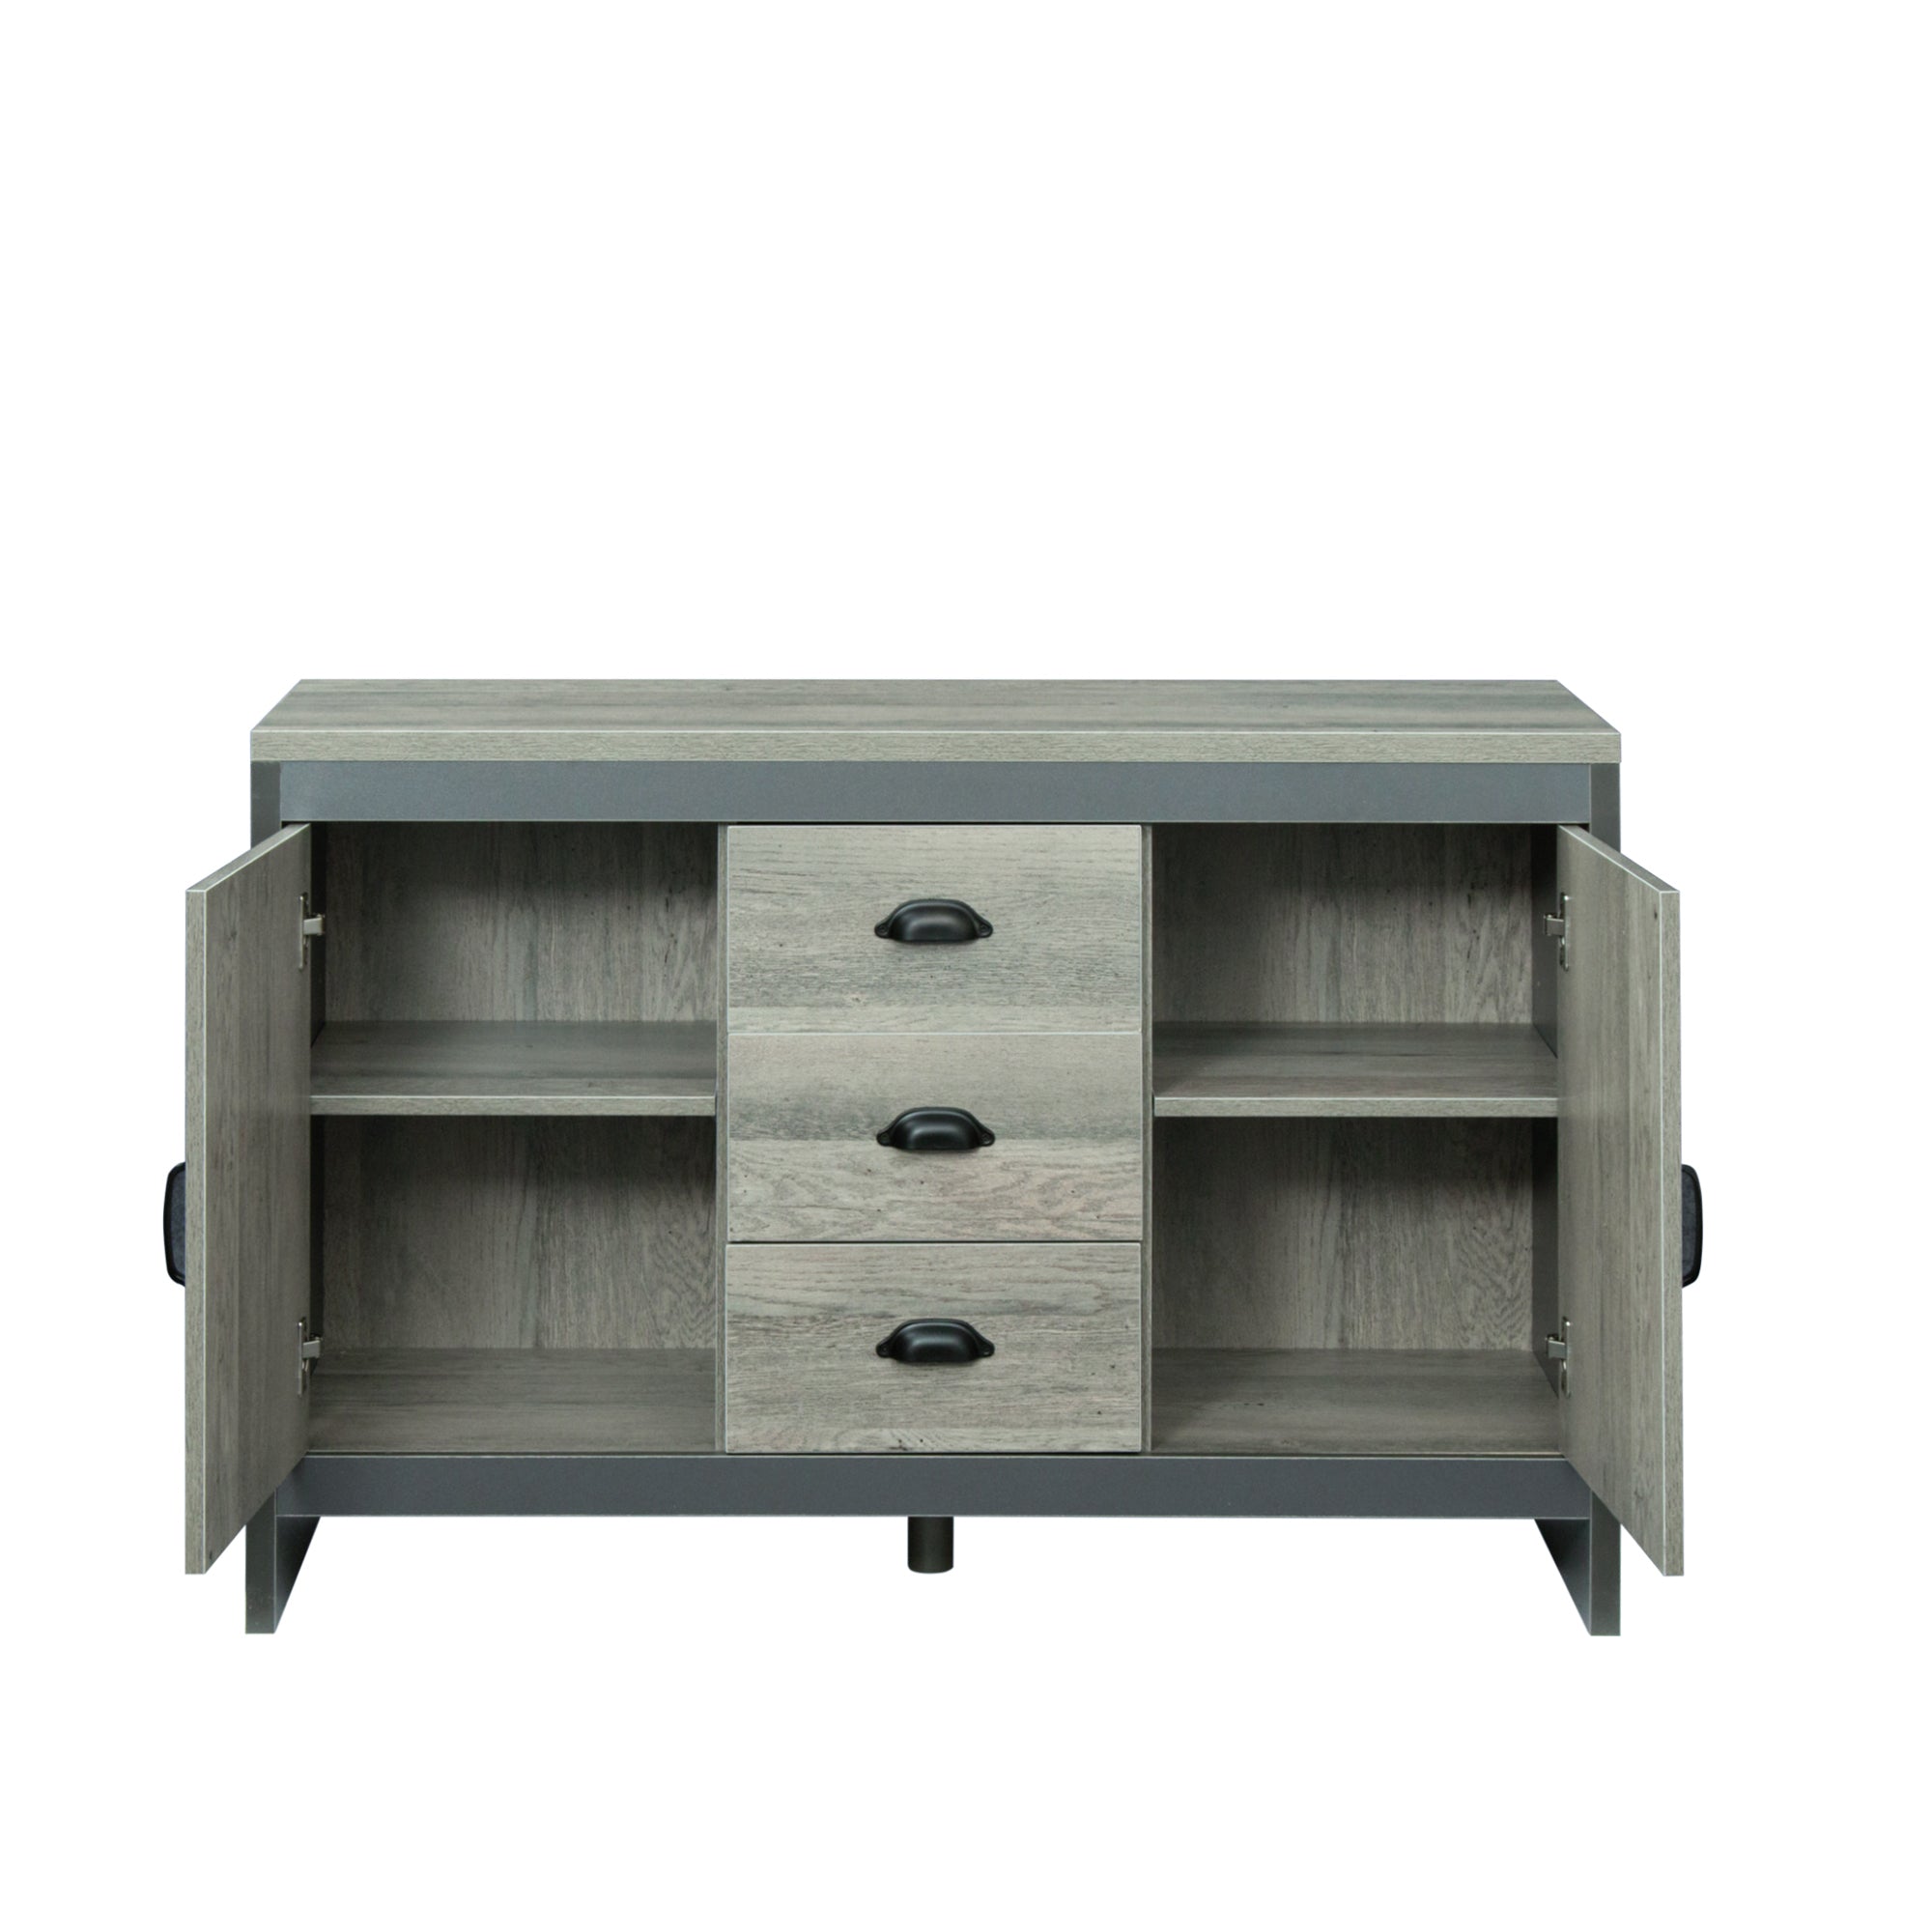 Double Door side Cabinet with Drawers